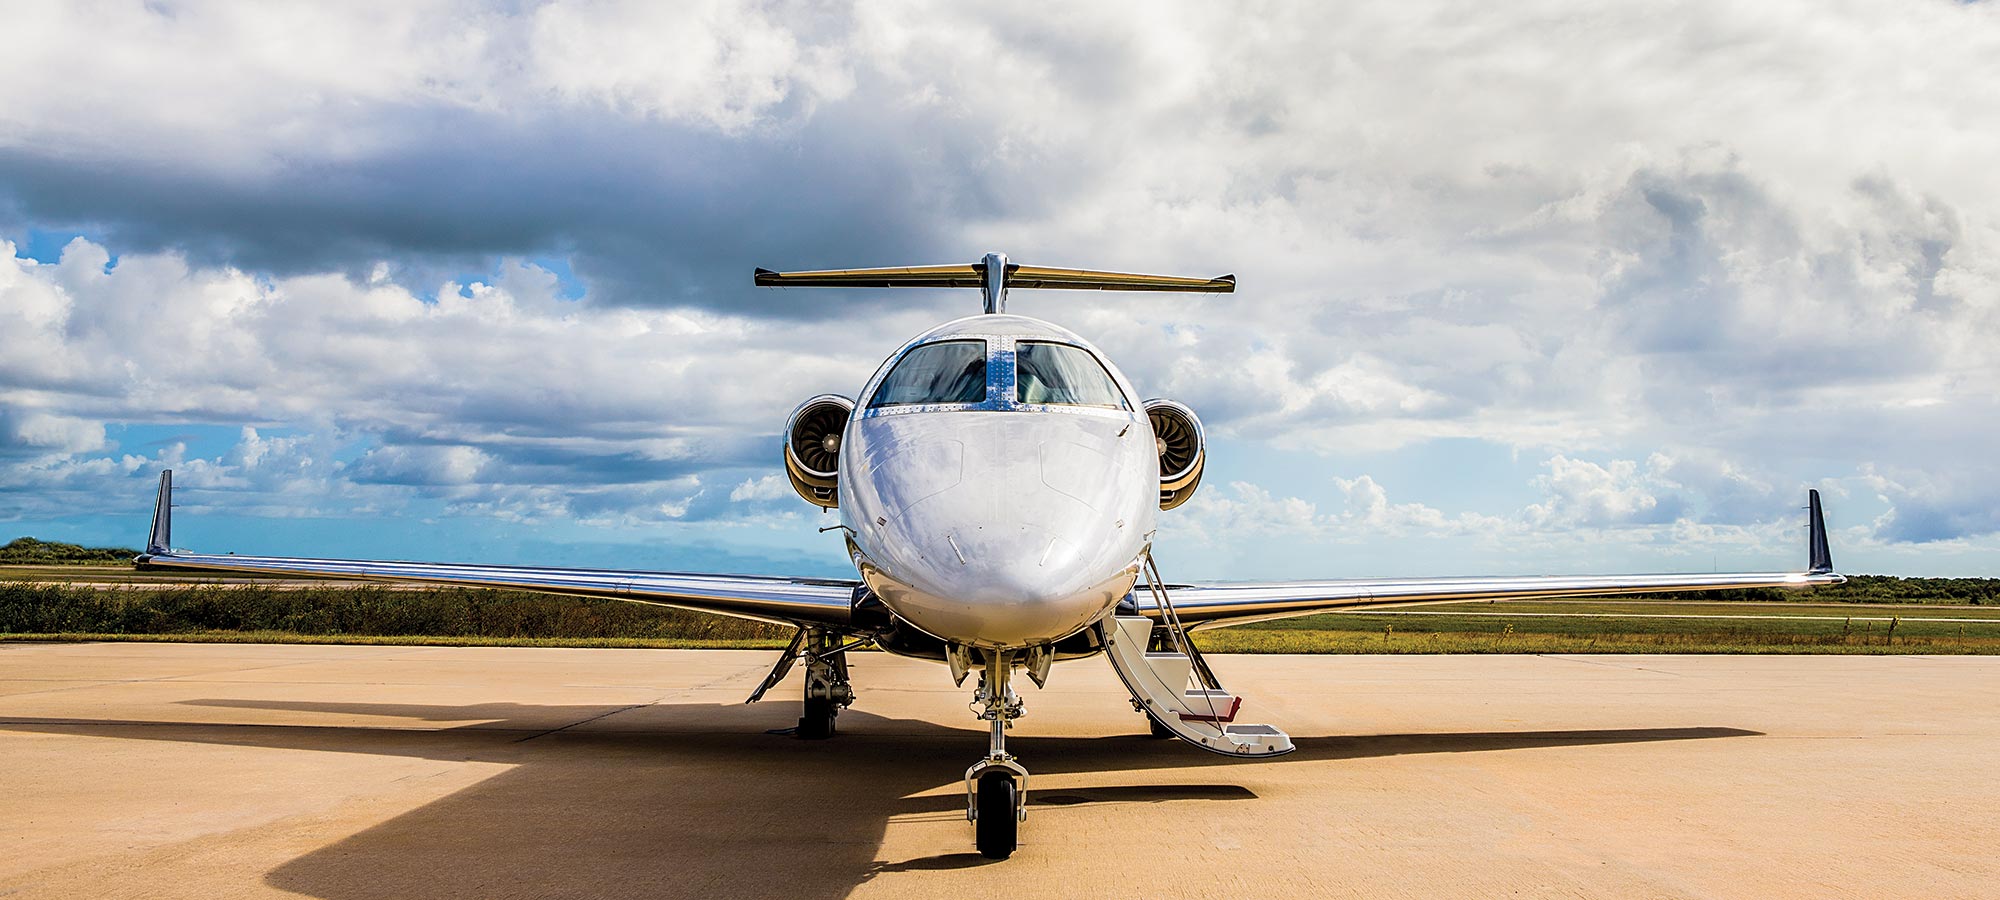 How to Buy a Used Jet